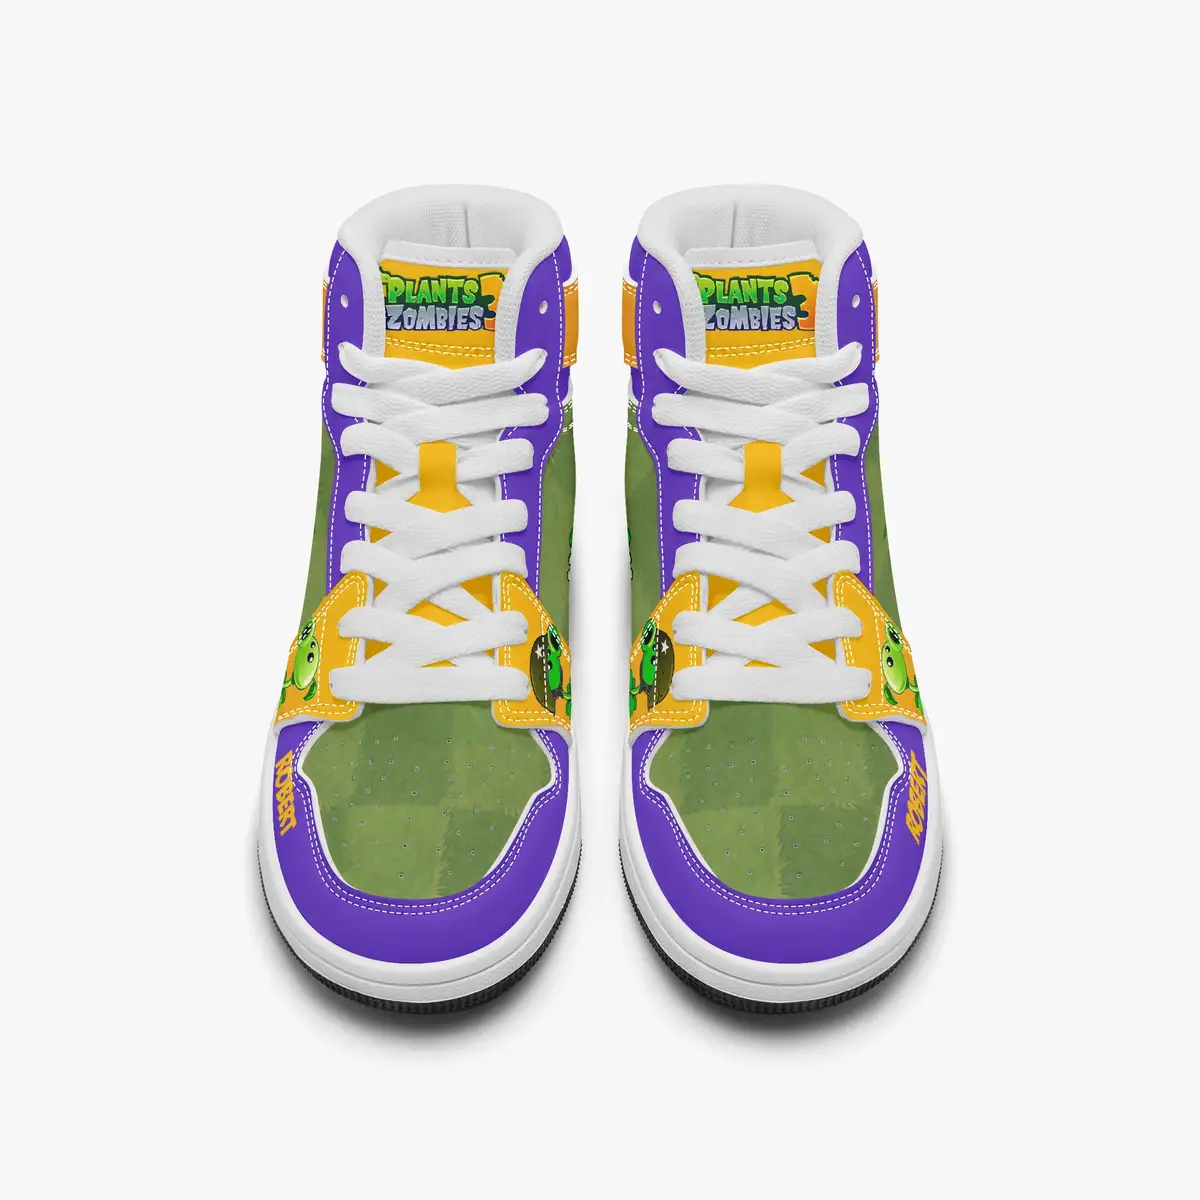 Personalized Plants vs Zombies Characters High-Top Leather Sneakers – Jordans Style Shoes Cool Kiddo 24